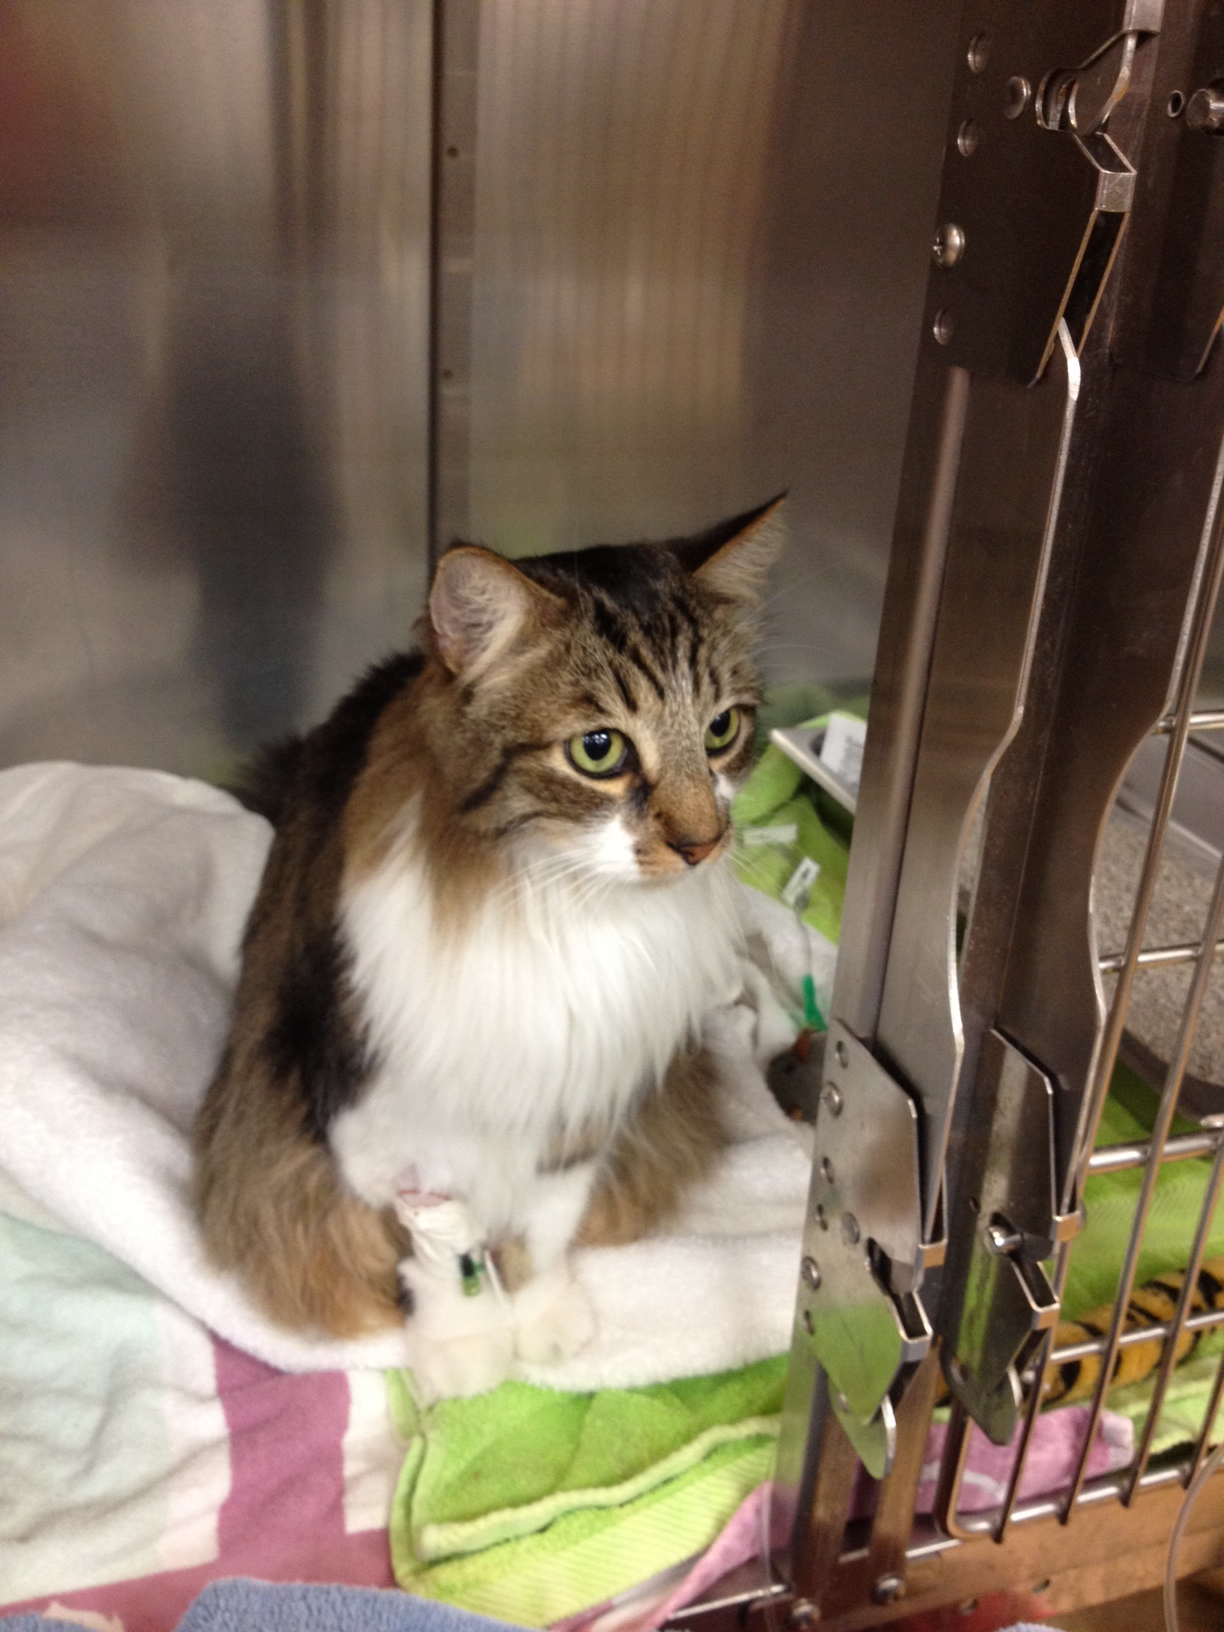 Fritz the awesome cat needs a miracle of healing: Kidney failure and where to go next